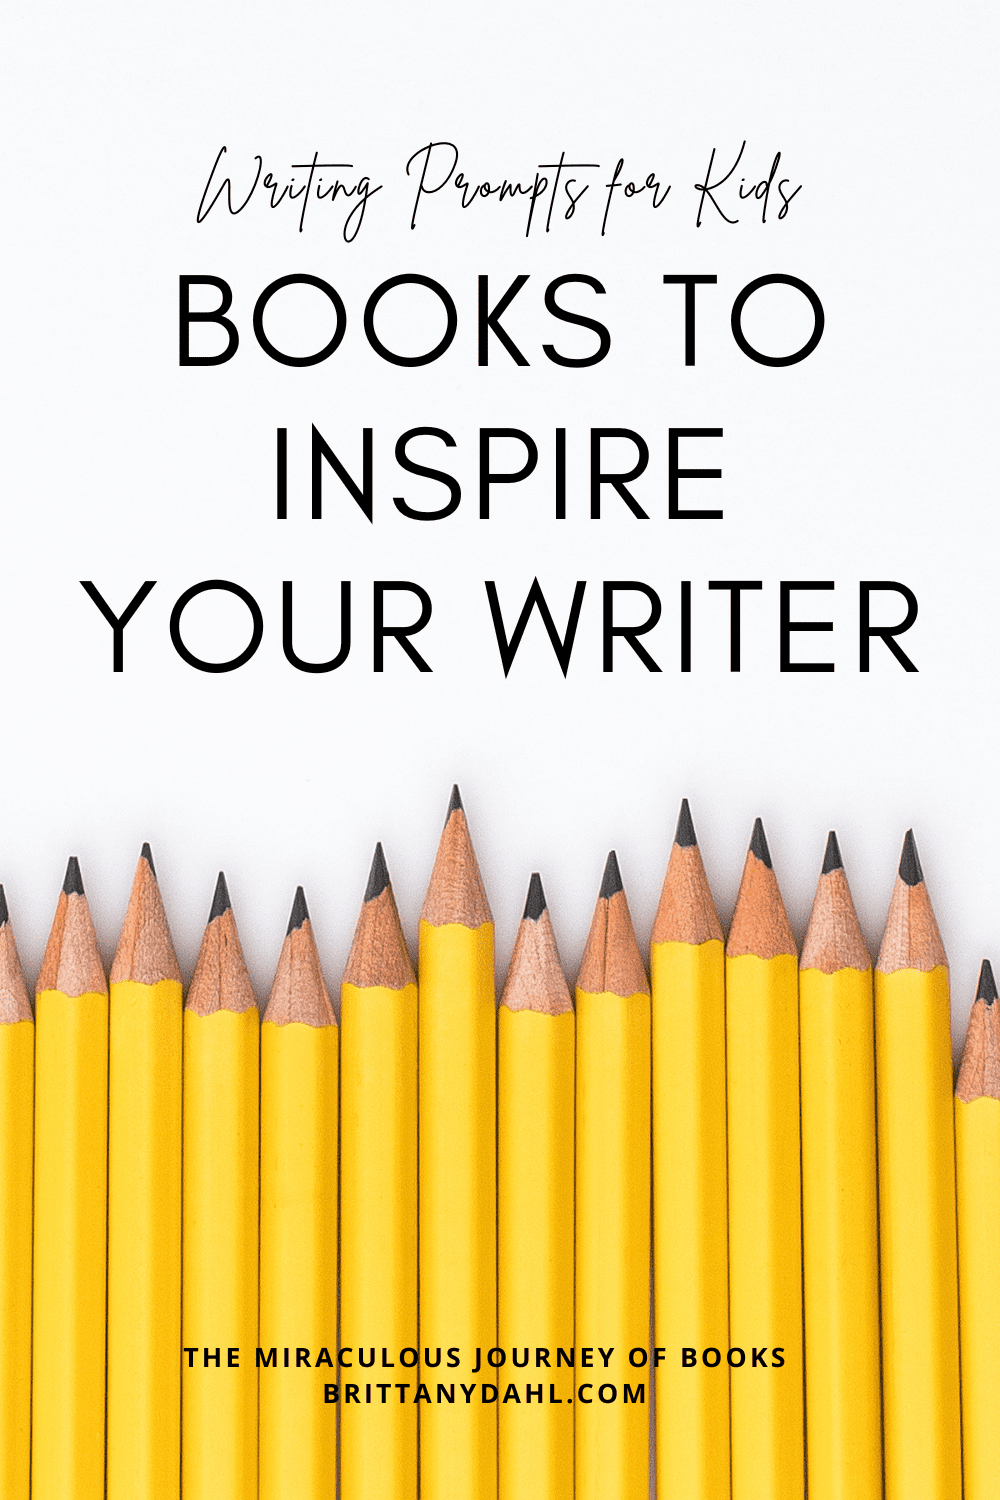 Writing Prompts for Kids: Books to Inspire Your Writer by The Miraculous Journey of Books at Brittanydahl.com. Image of yellow pencils in a row.